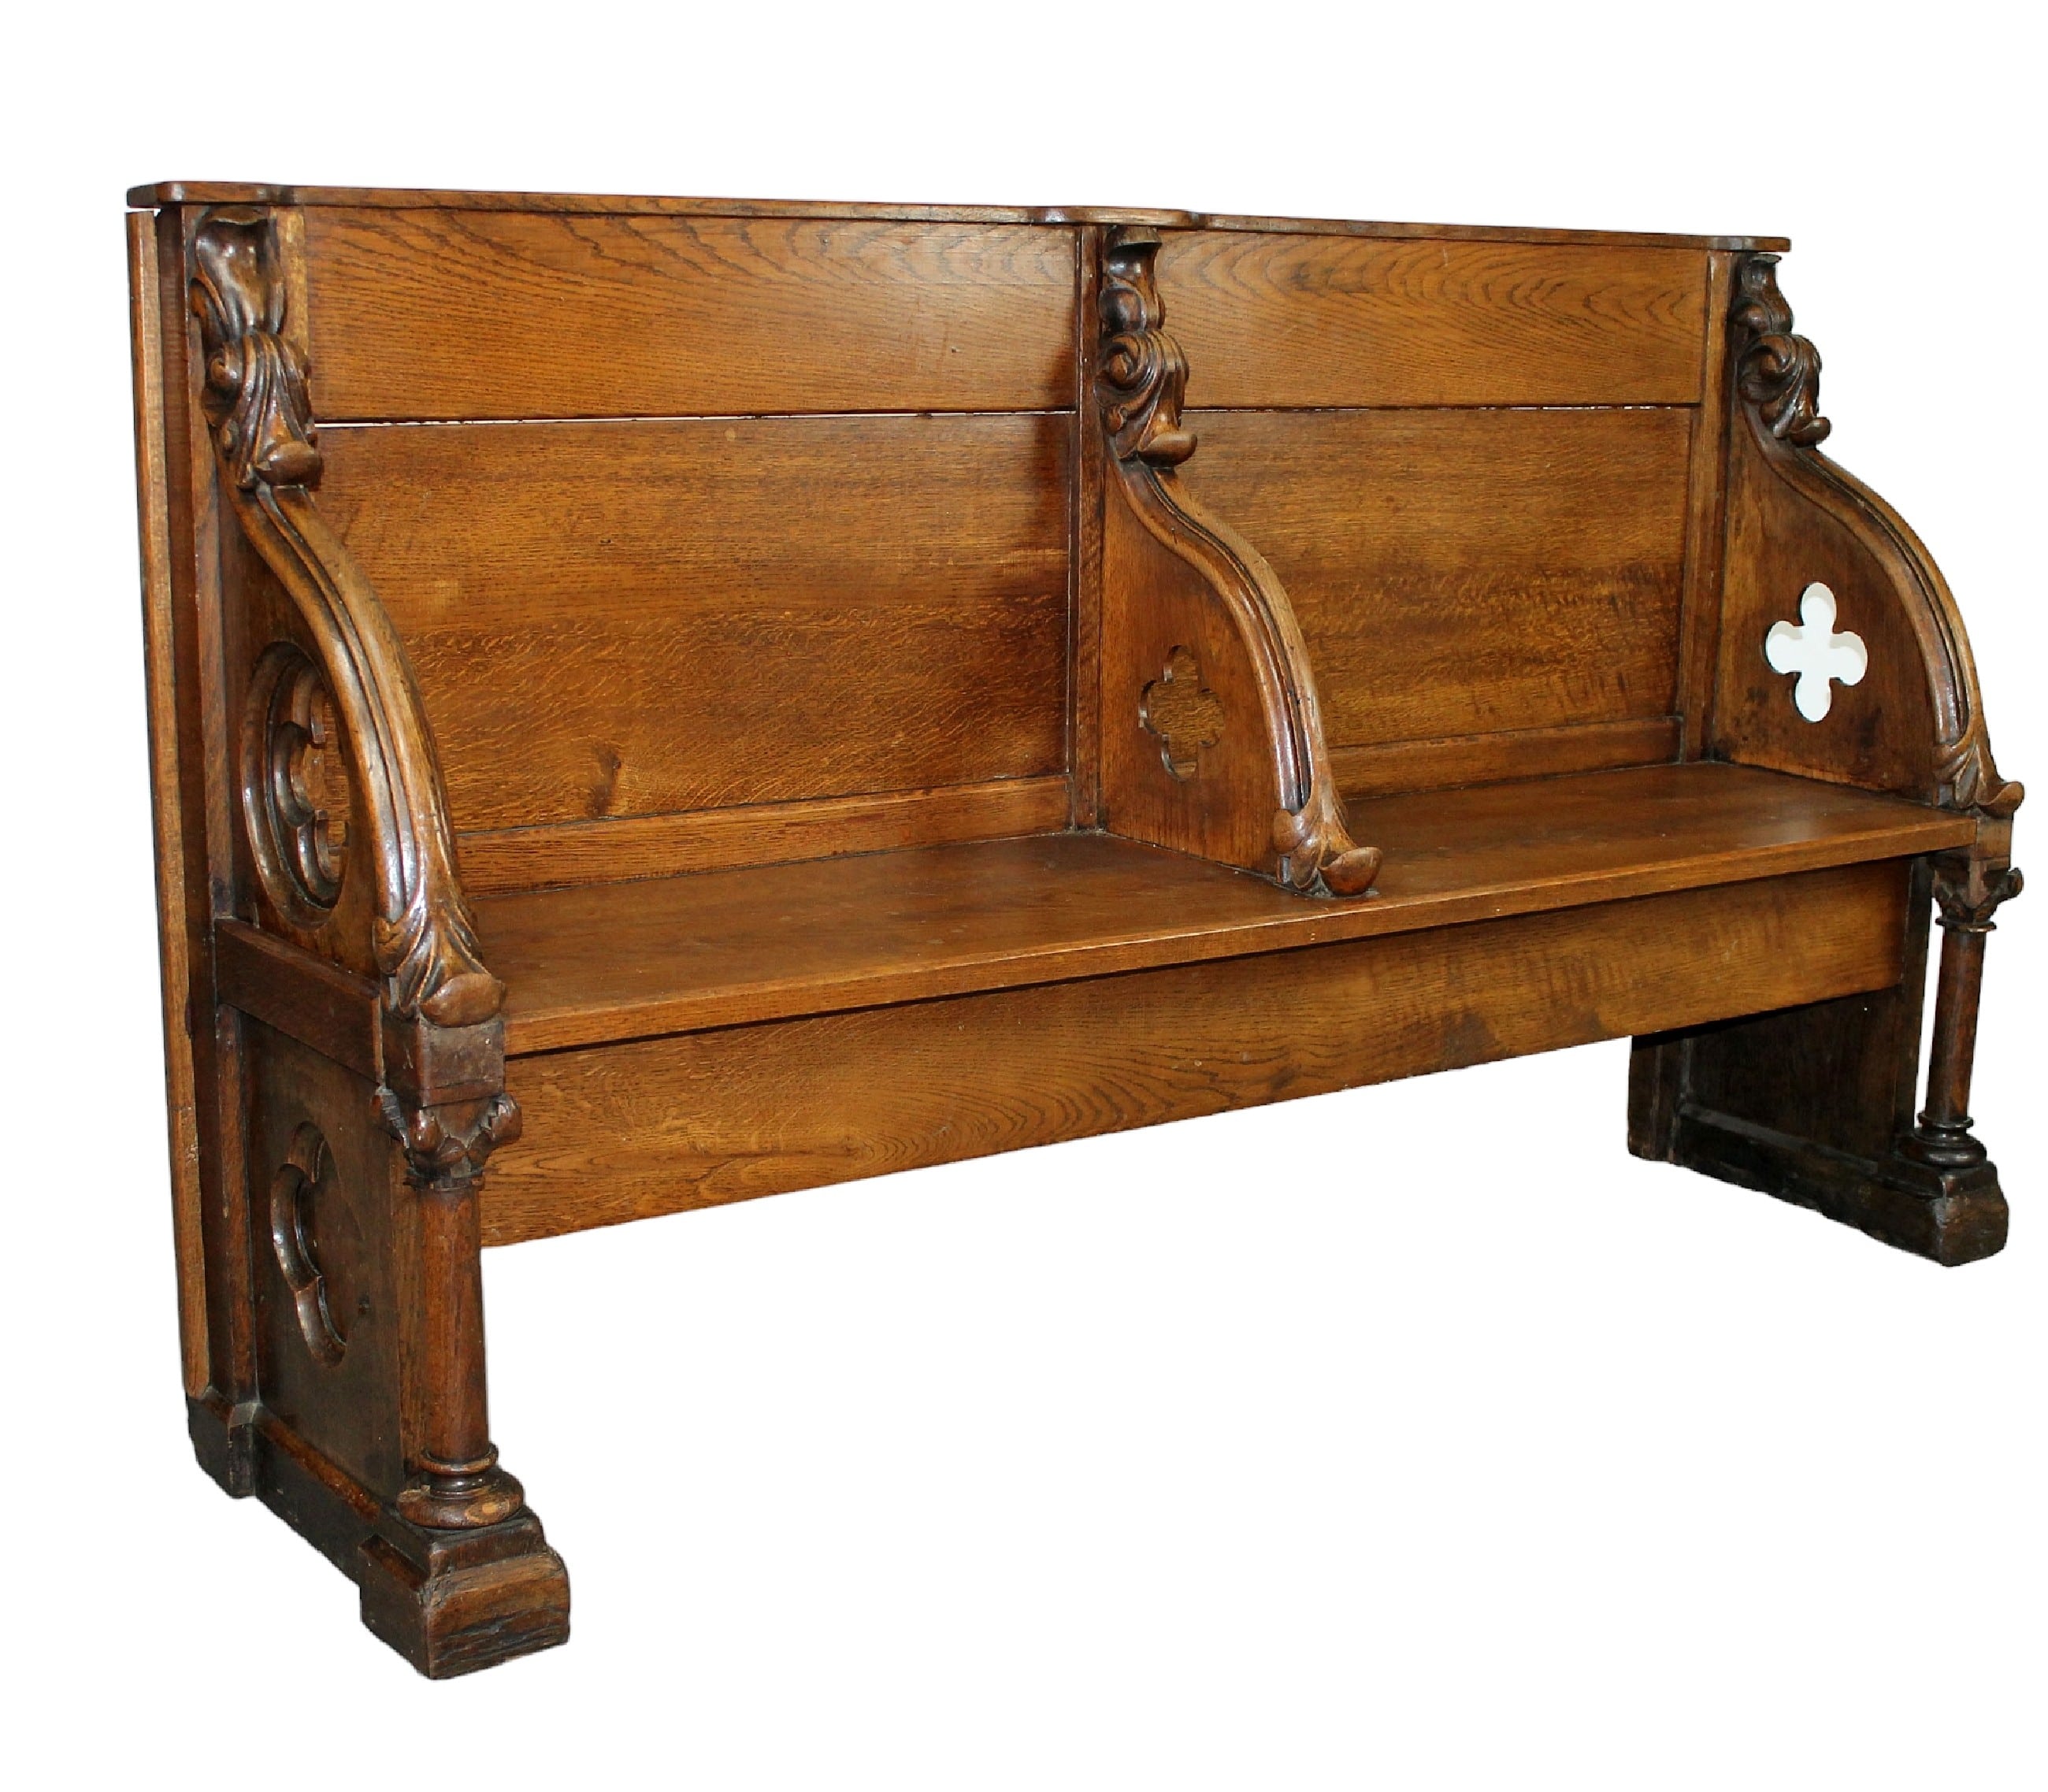 French Gothic Revival oak church pew bench